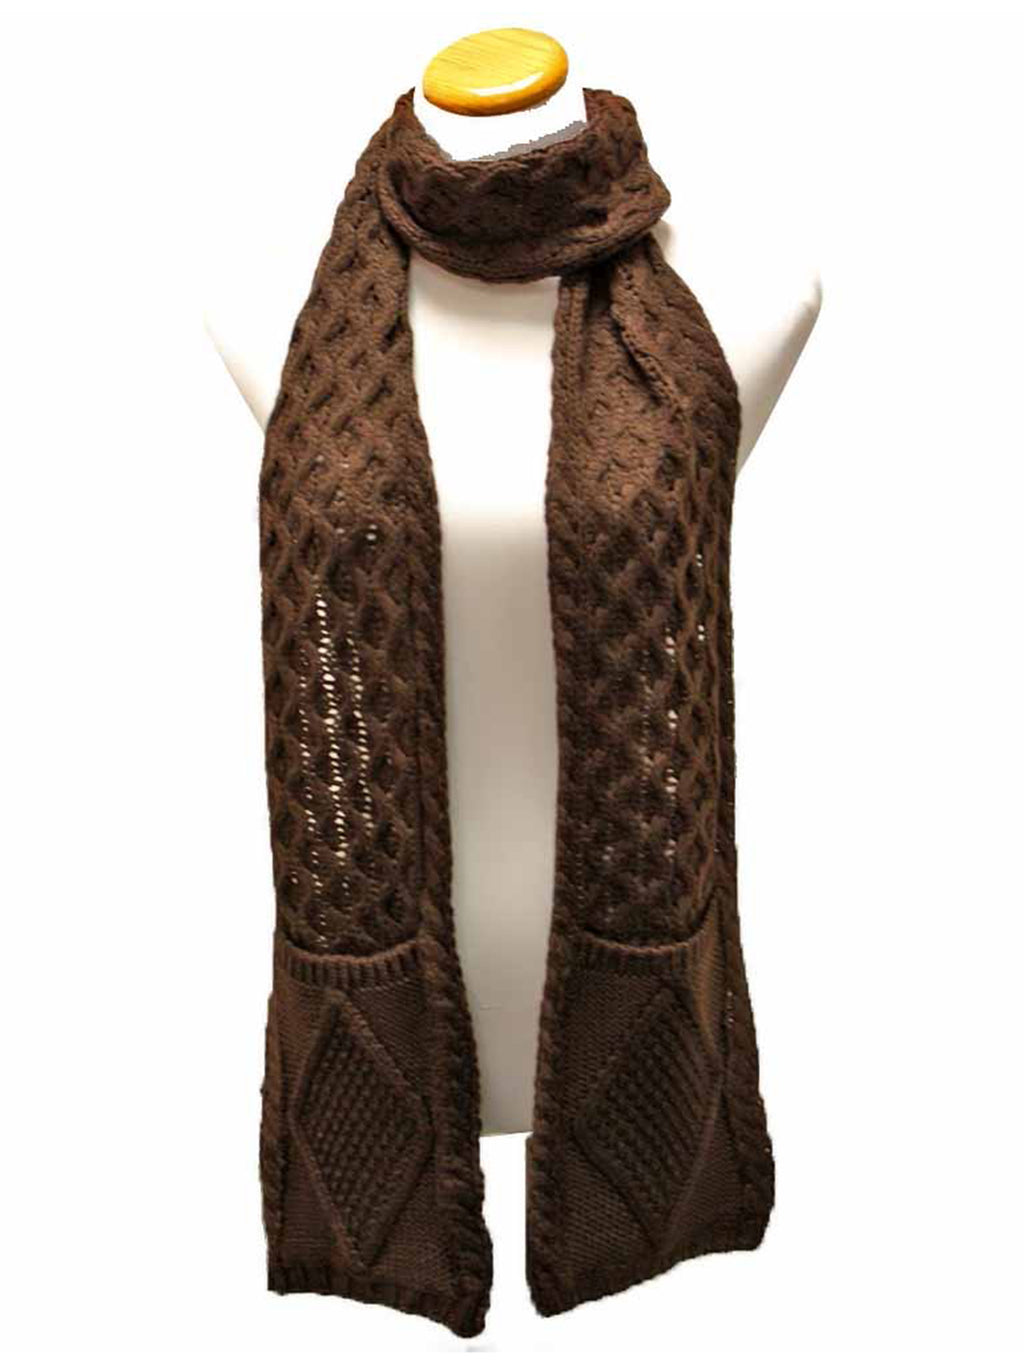 Classic Knit Unisex Winter Scarf With Pockets